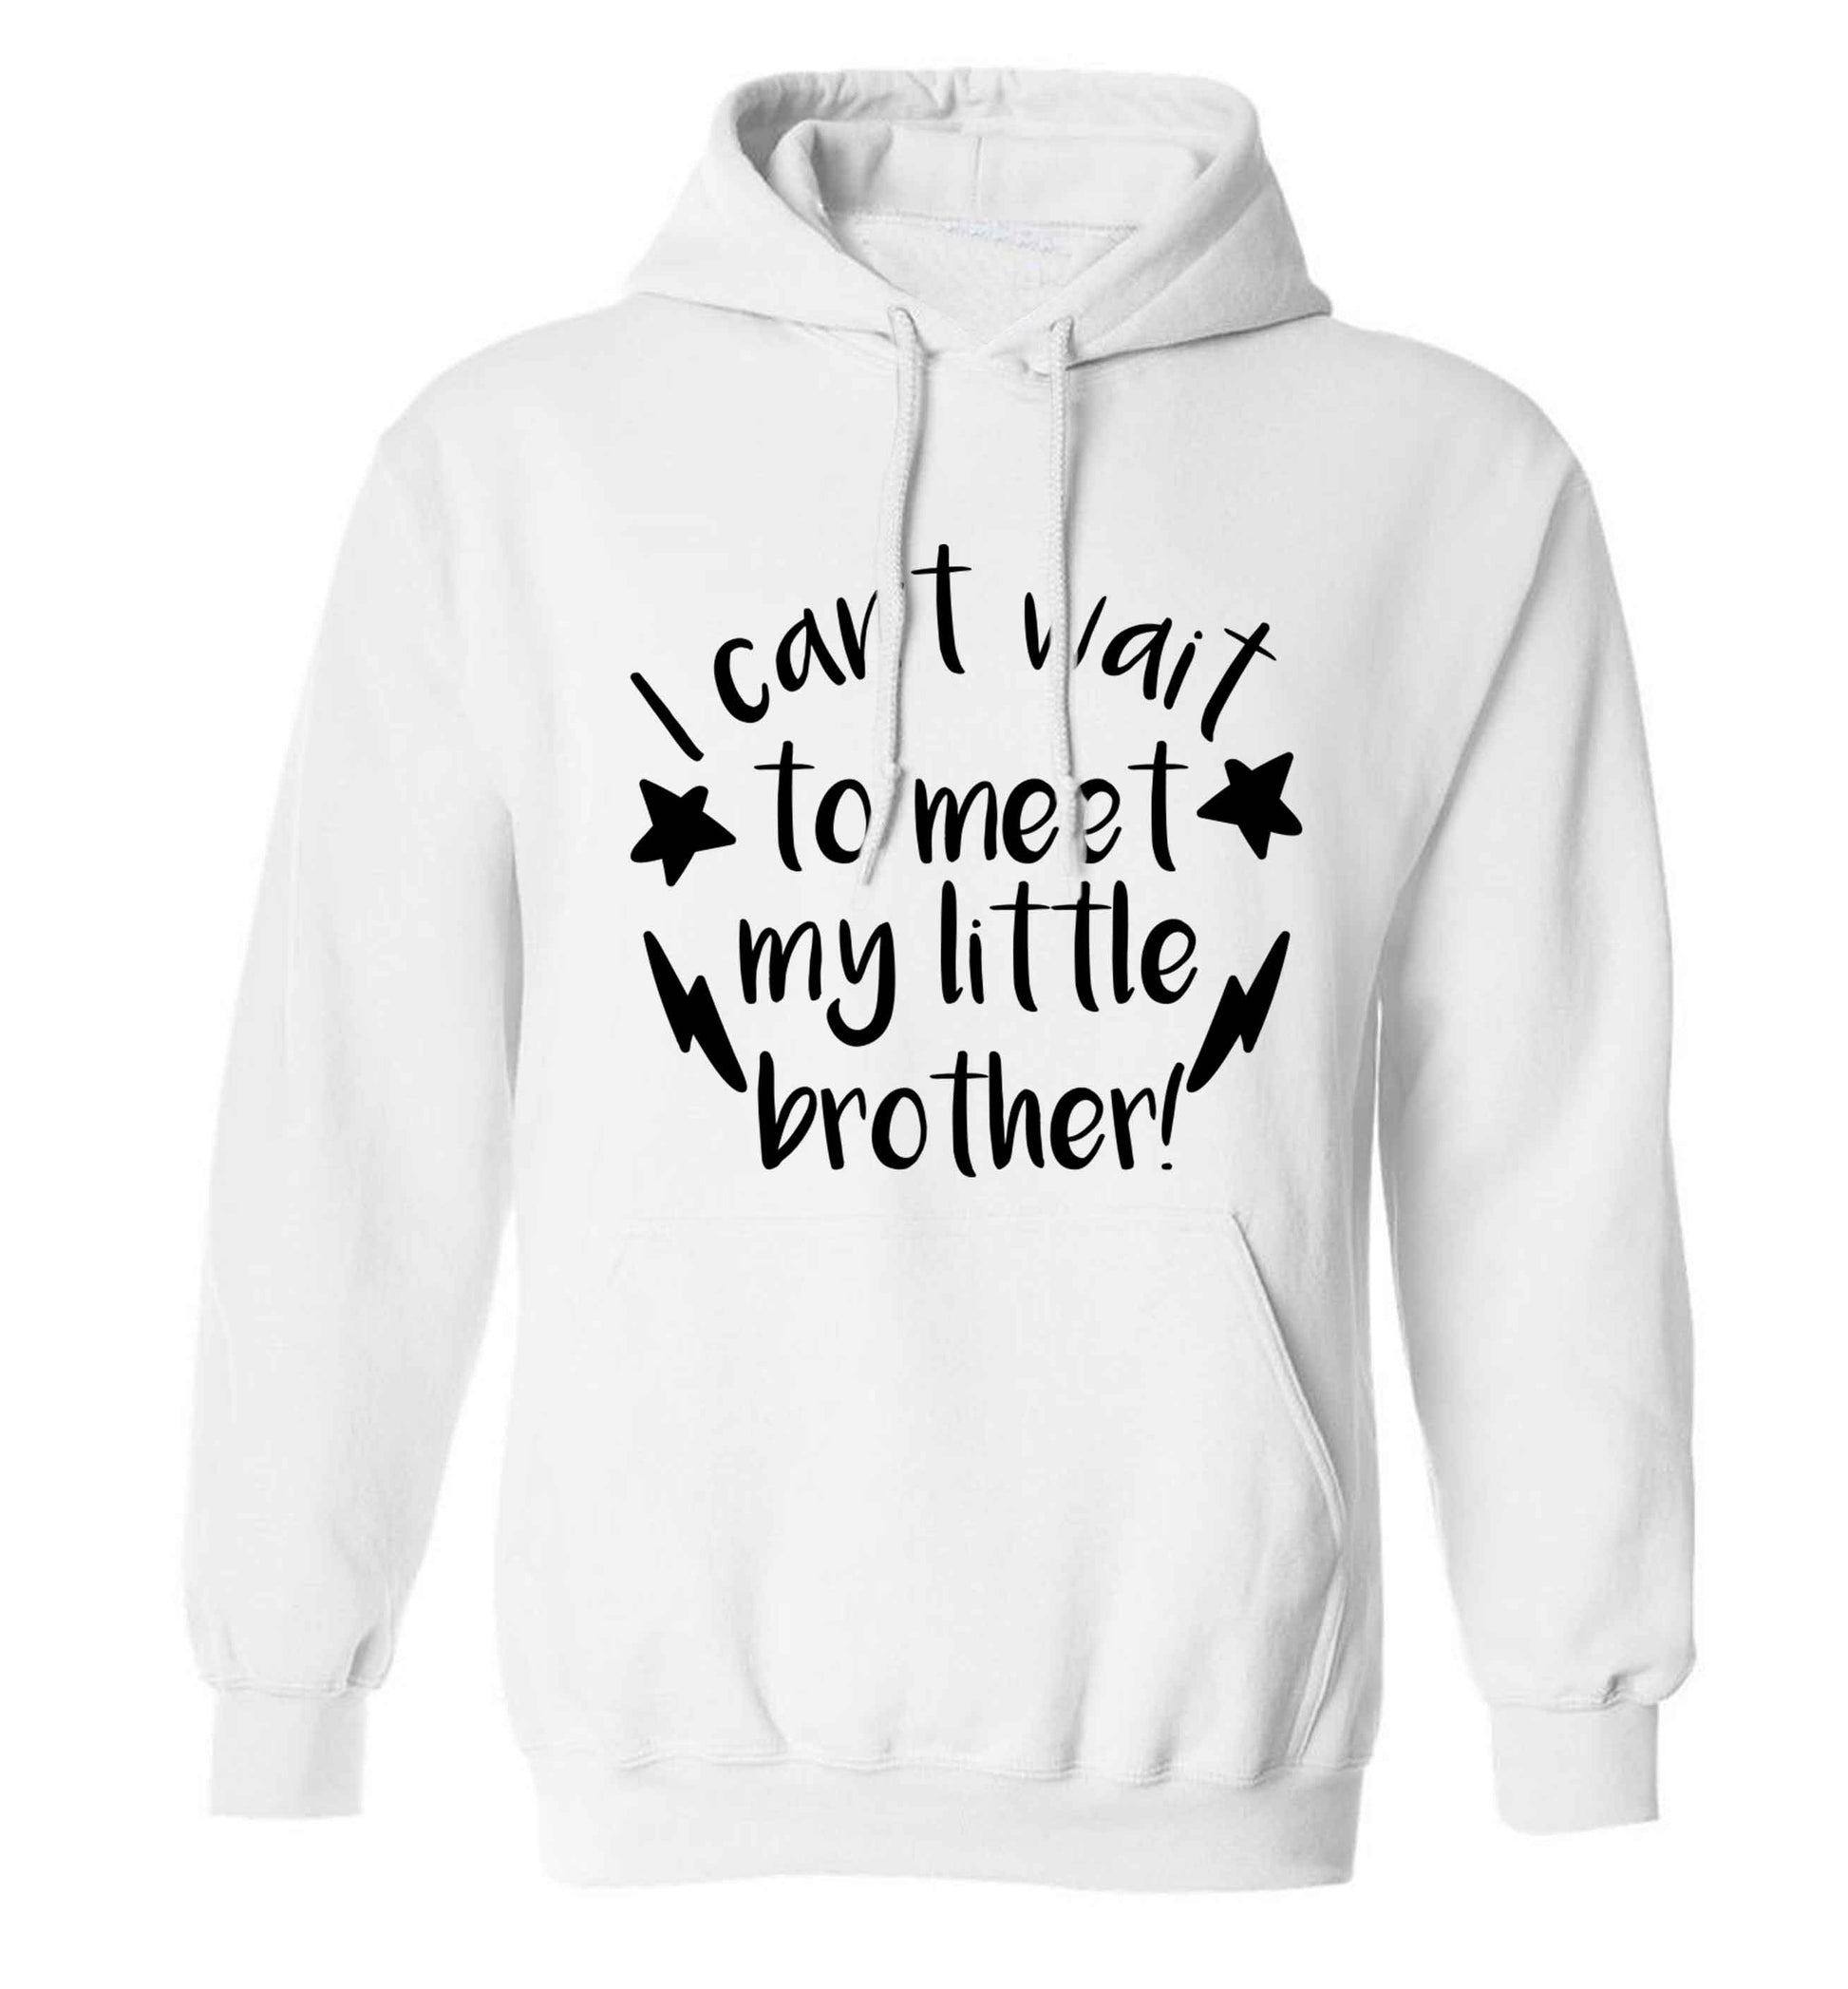 I can't wait to meet my sister! adults unisex white hoodie 2XL